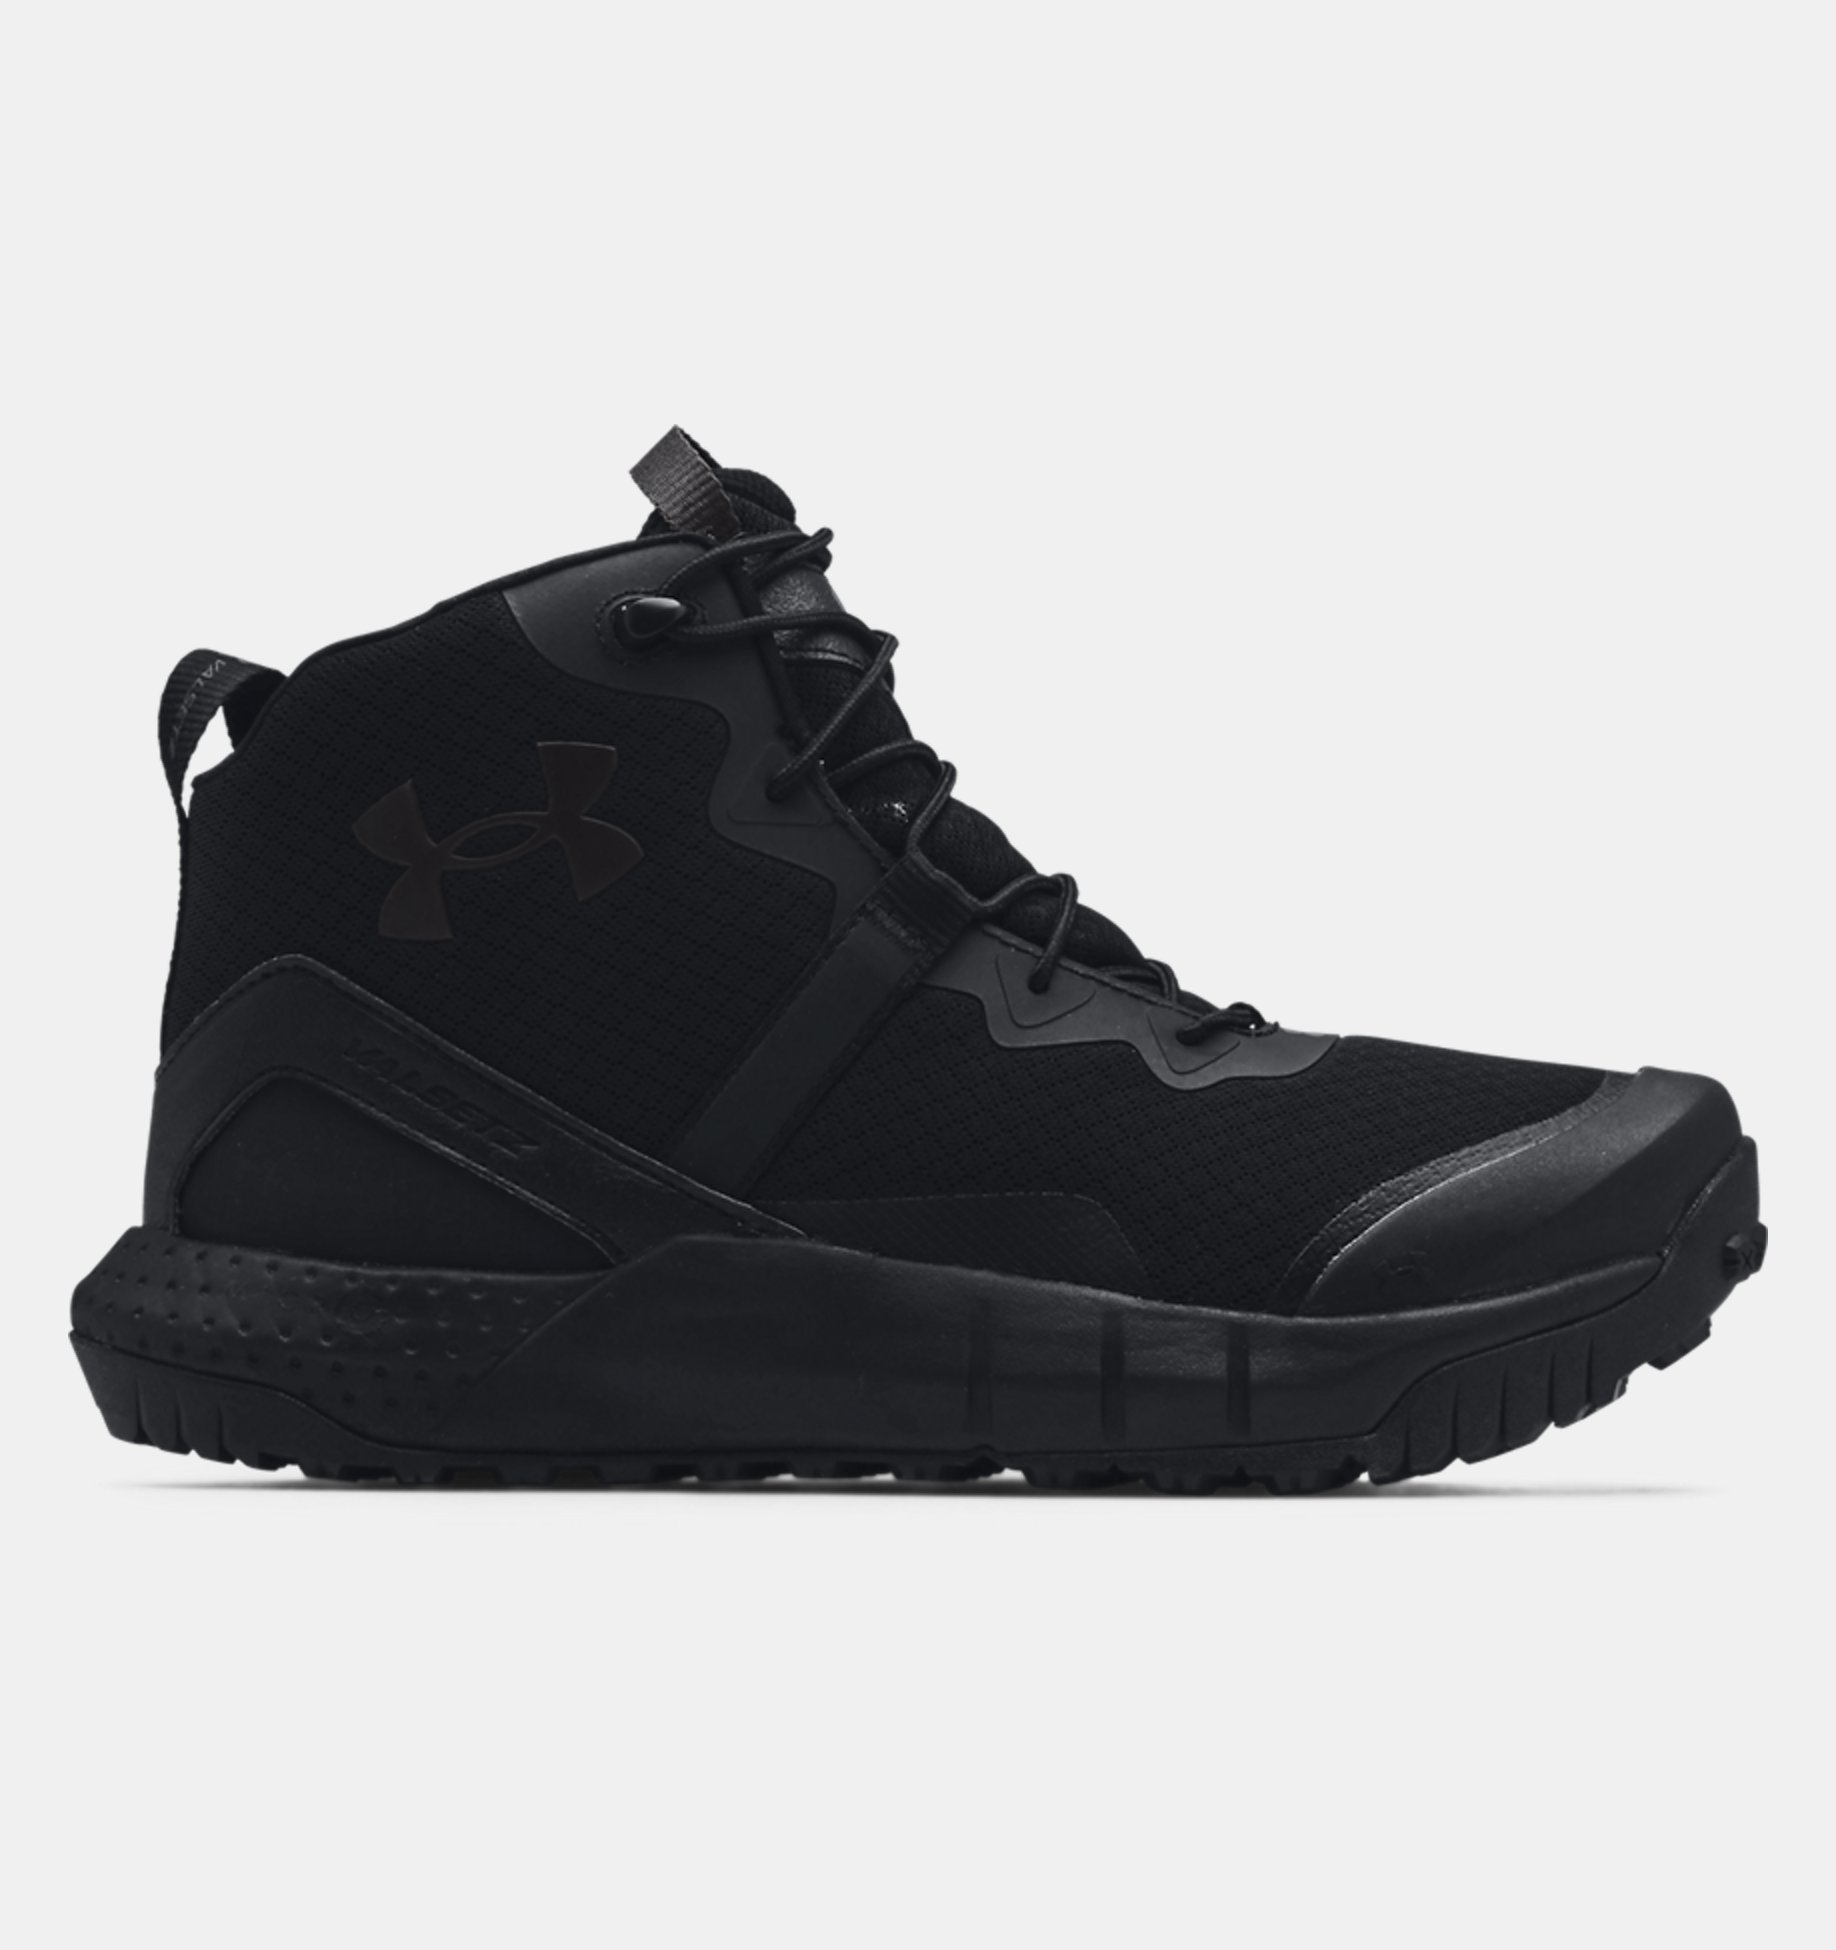 Under Armour Men's Micro G Valsetz Mid Military and Tactical Boot 